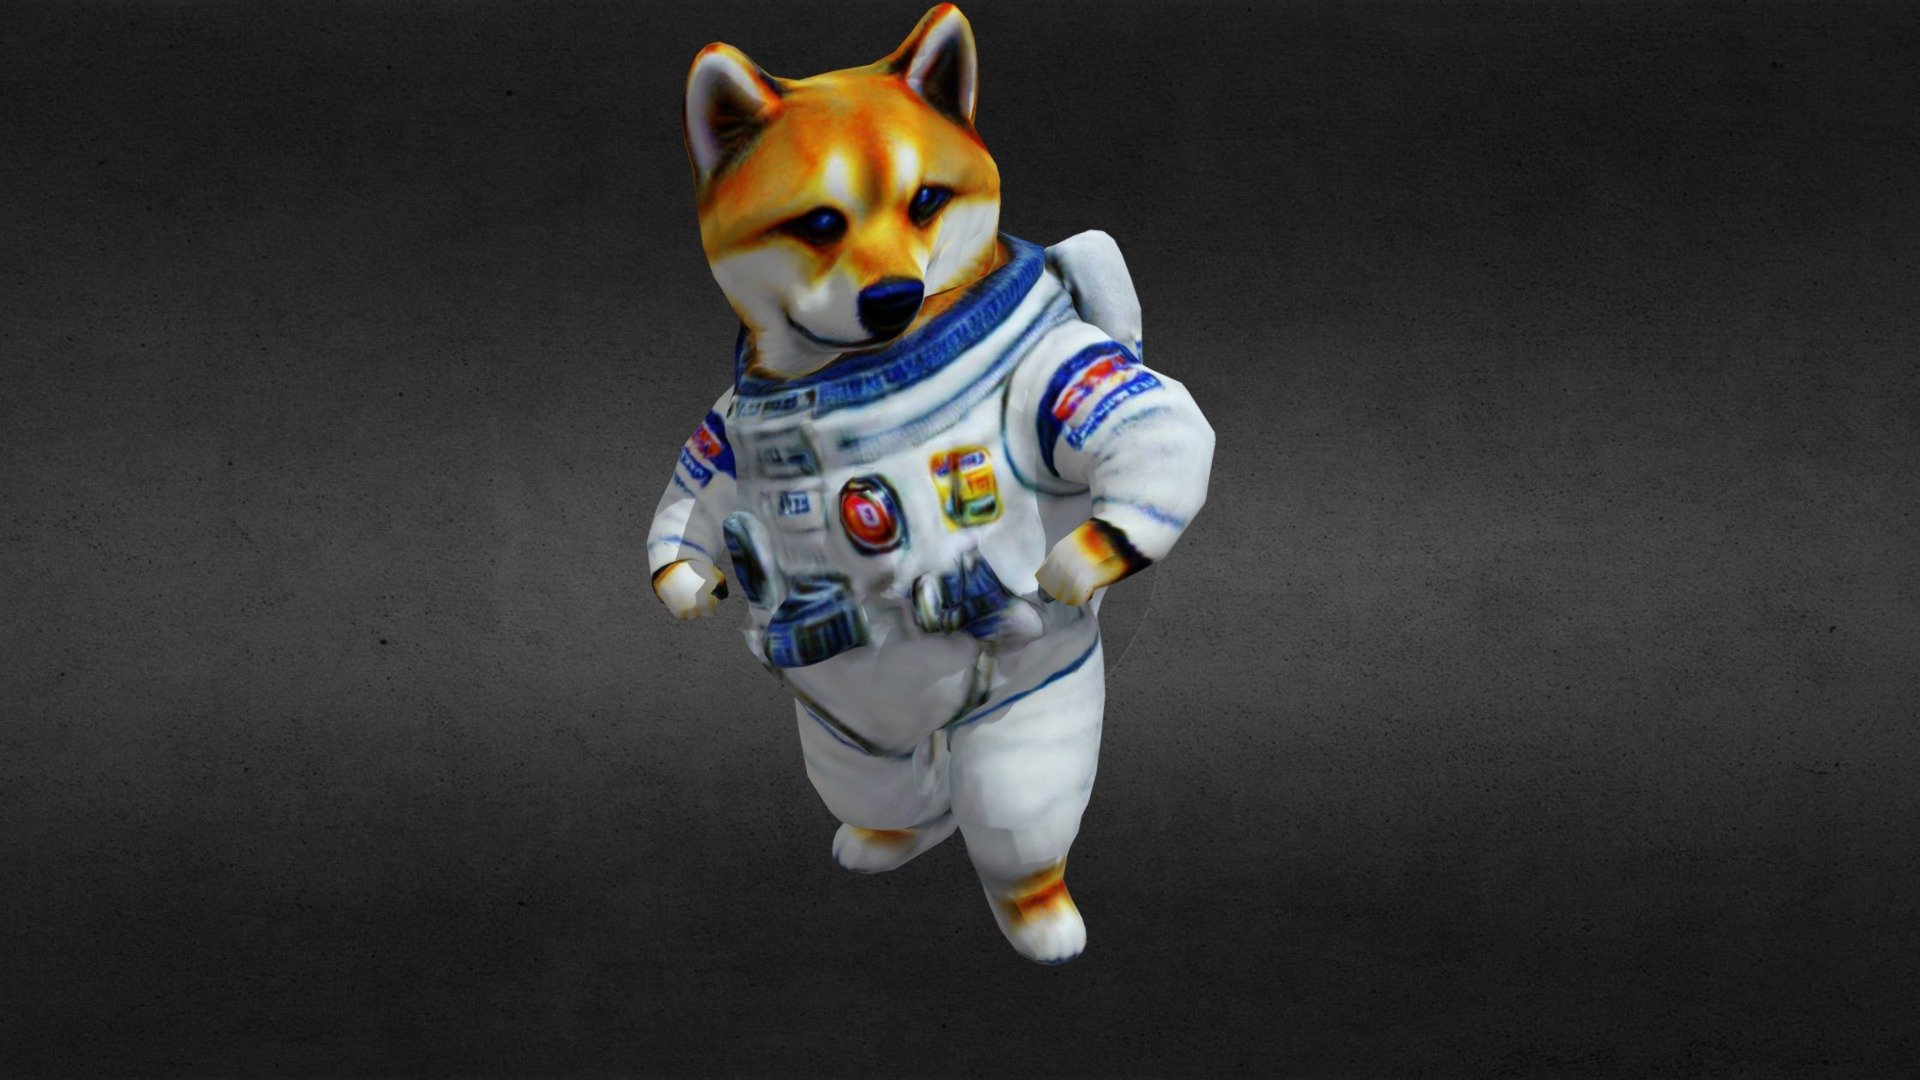 Cosmo Doge Dance 3D Model: A fun and quirky model featuring the popular Doge meme character dressed as an astronaut and performing a dance. Perfect for lighthearted space-themed games, animations, or as a unique digital artwork.

Key Features:

Doge meme character in astronaut attire.
Playful dance animation.
Ideal for space-themed or humorous digital content.
Compatible with major 3D software and game engines.
Created with AI - Cosmo Doge (Low Poly) - Buy Royalty Free 3D model by GAM3D (@gam3d.engine) 3d model